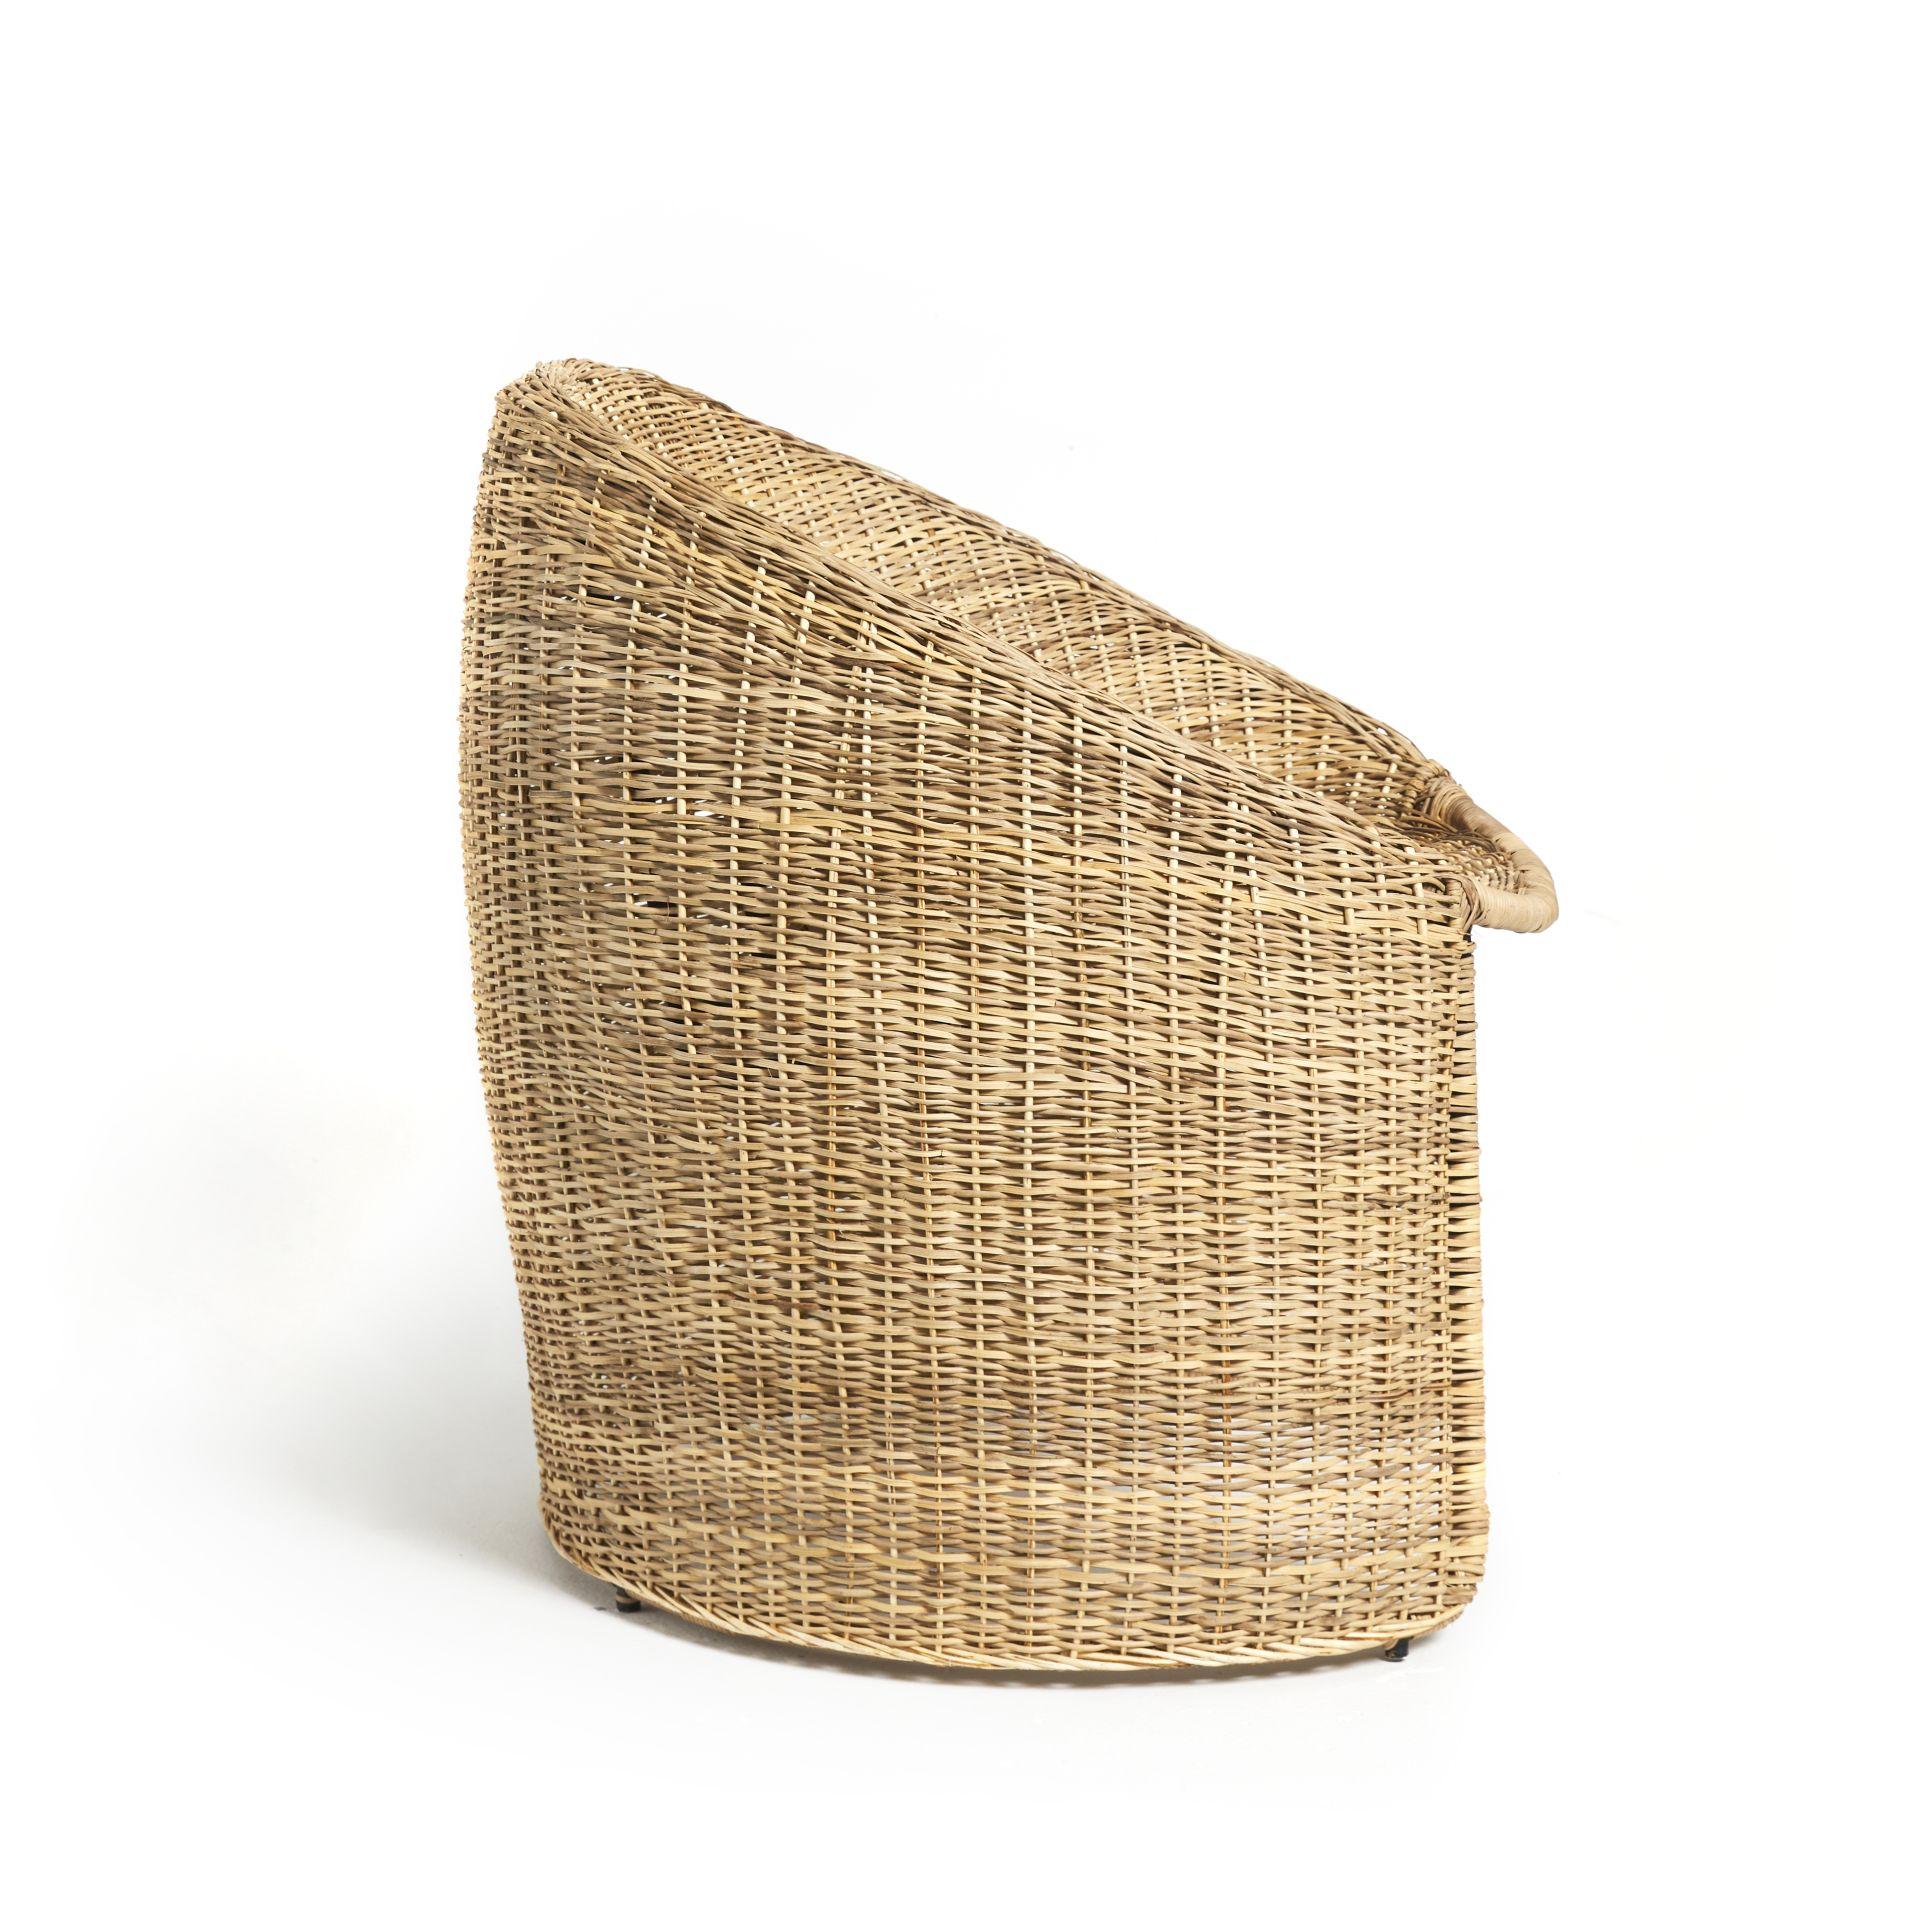 Ames introduces a new material to the popular Cartagenas furniture series from Sebastian Herkner: wicker. This natural material reinvents the chairs of the series, giving them a warm and calm presence. In Colombia, there’s a long history of using